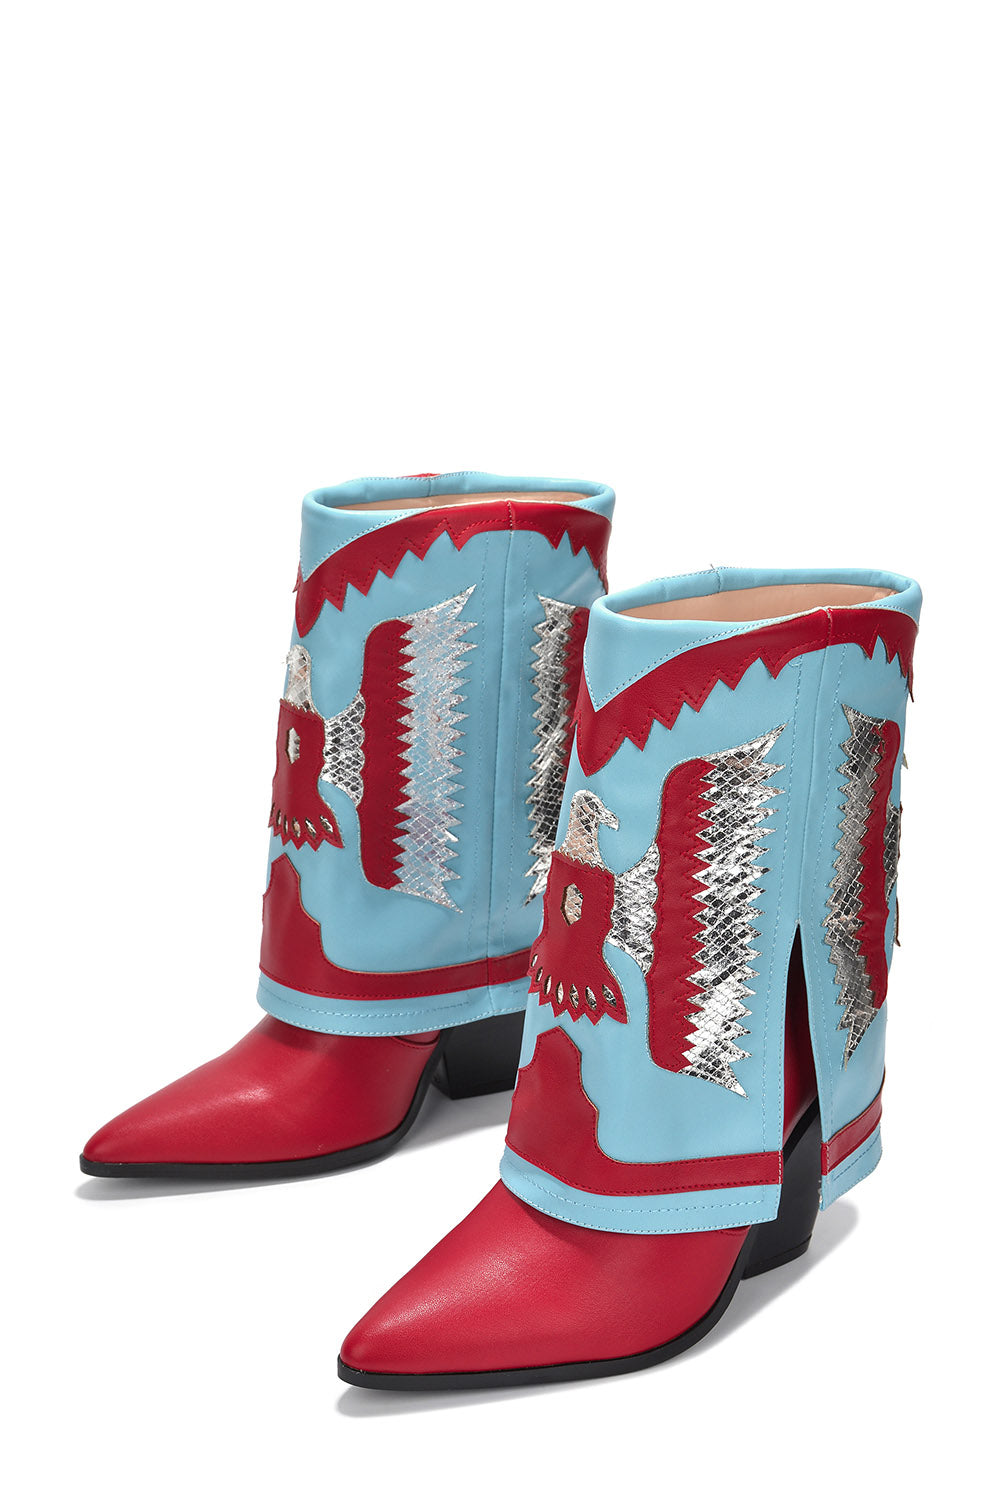 Cape Robbin - HUMBLE - RED - BOOTIES